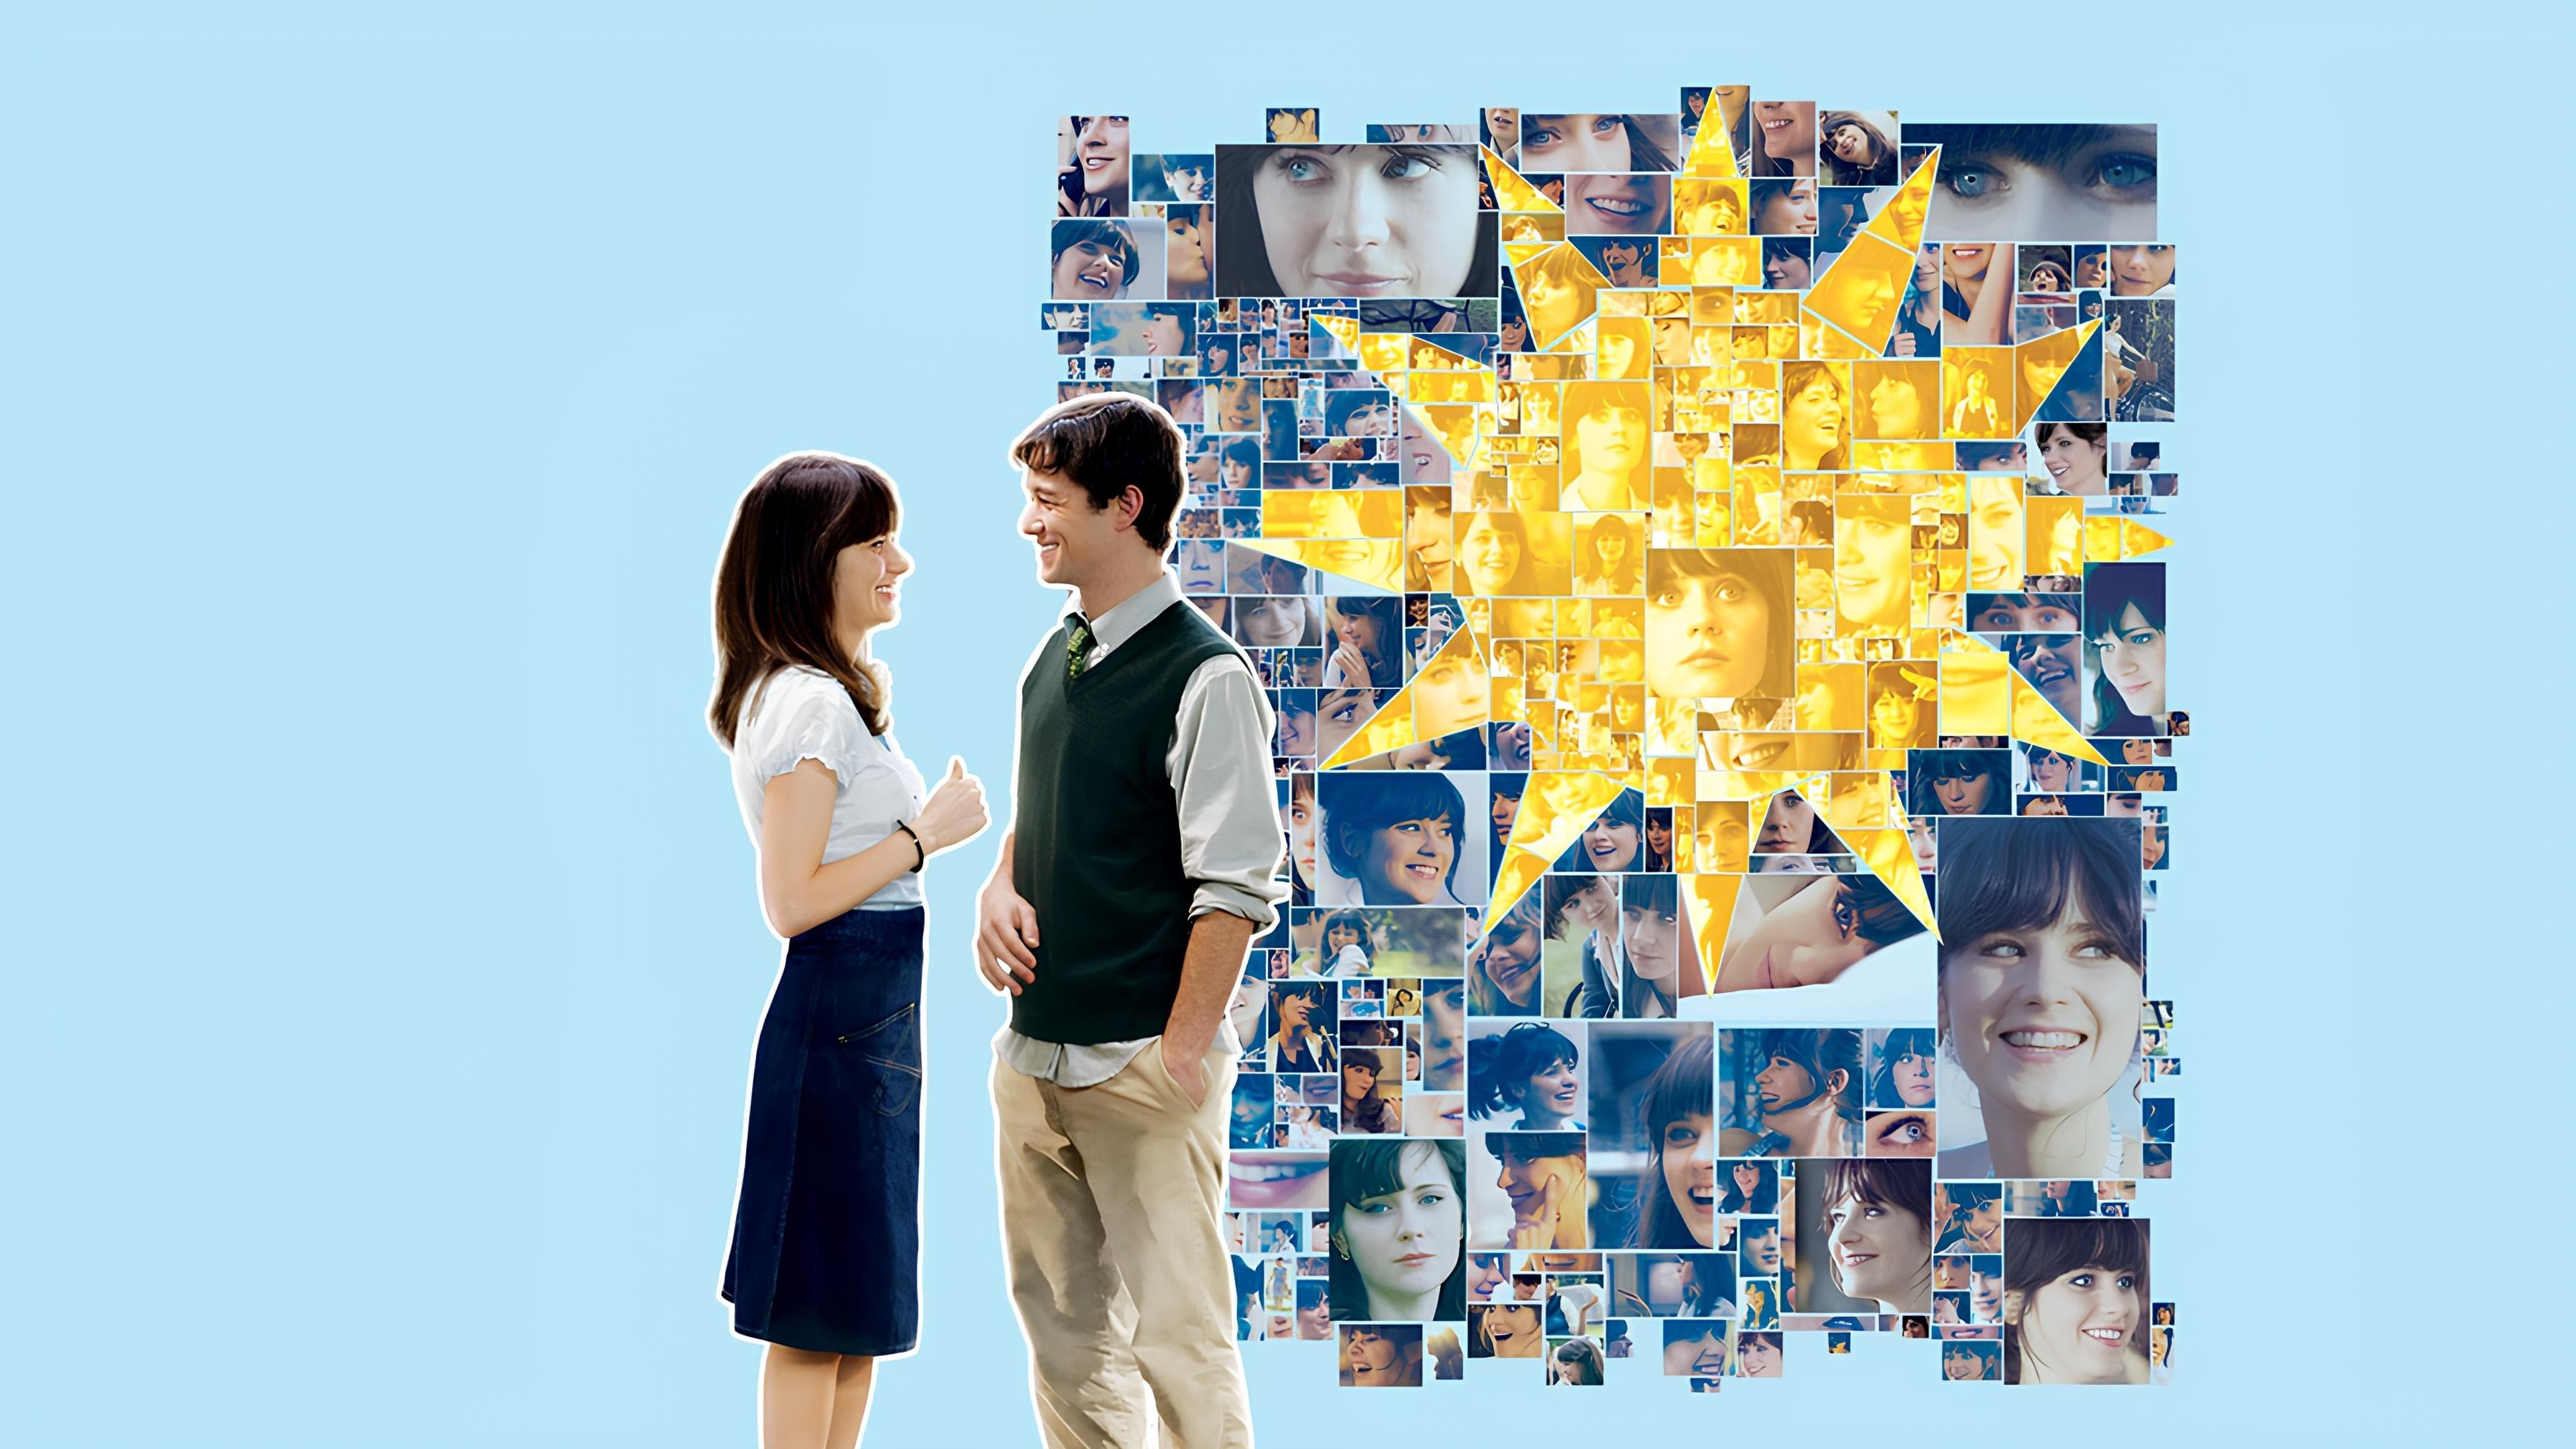 (500) Days of Summer backdrop